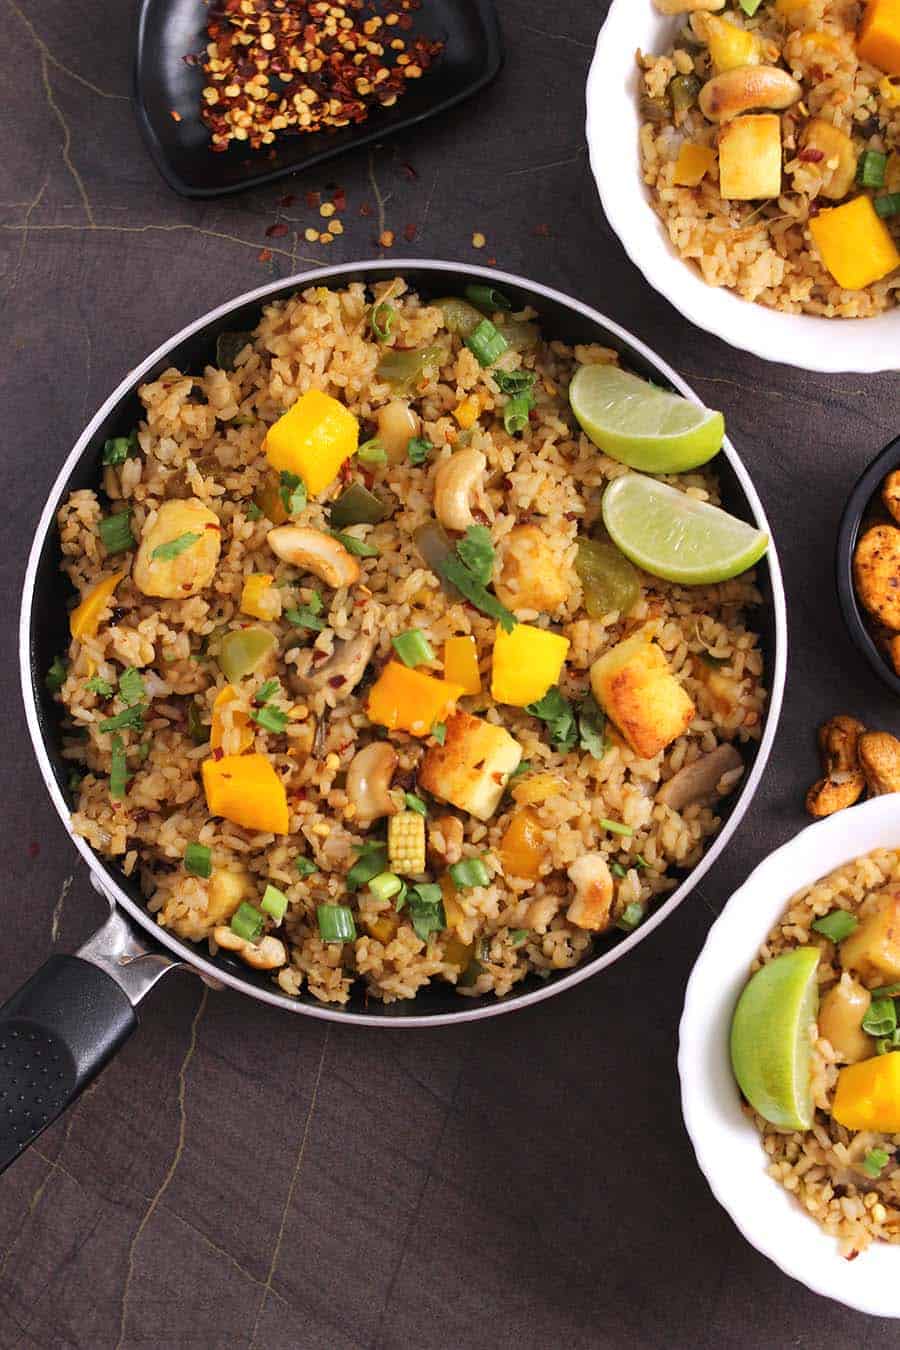 Thai Mango Fried Rice, Vegetable, veg or veggie fried rice, leftover rice recipe, how to cook fried rice on instant pot, Pineapple fried rice, basil fried rice, quick and easy vegetarian, vegan meals, #friedrice #pineapplefriedrice #thaistyle #thaifood #veganmeals #vegetarianmeals #dinnerrecipes